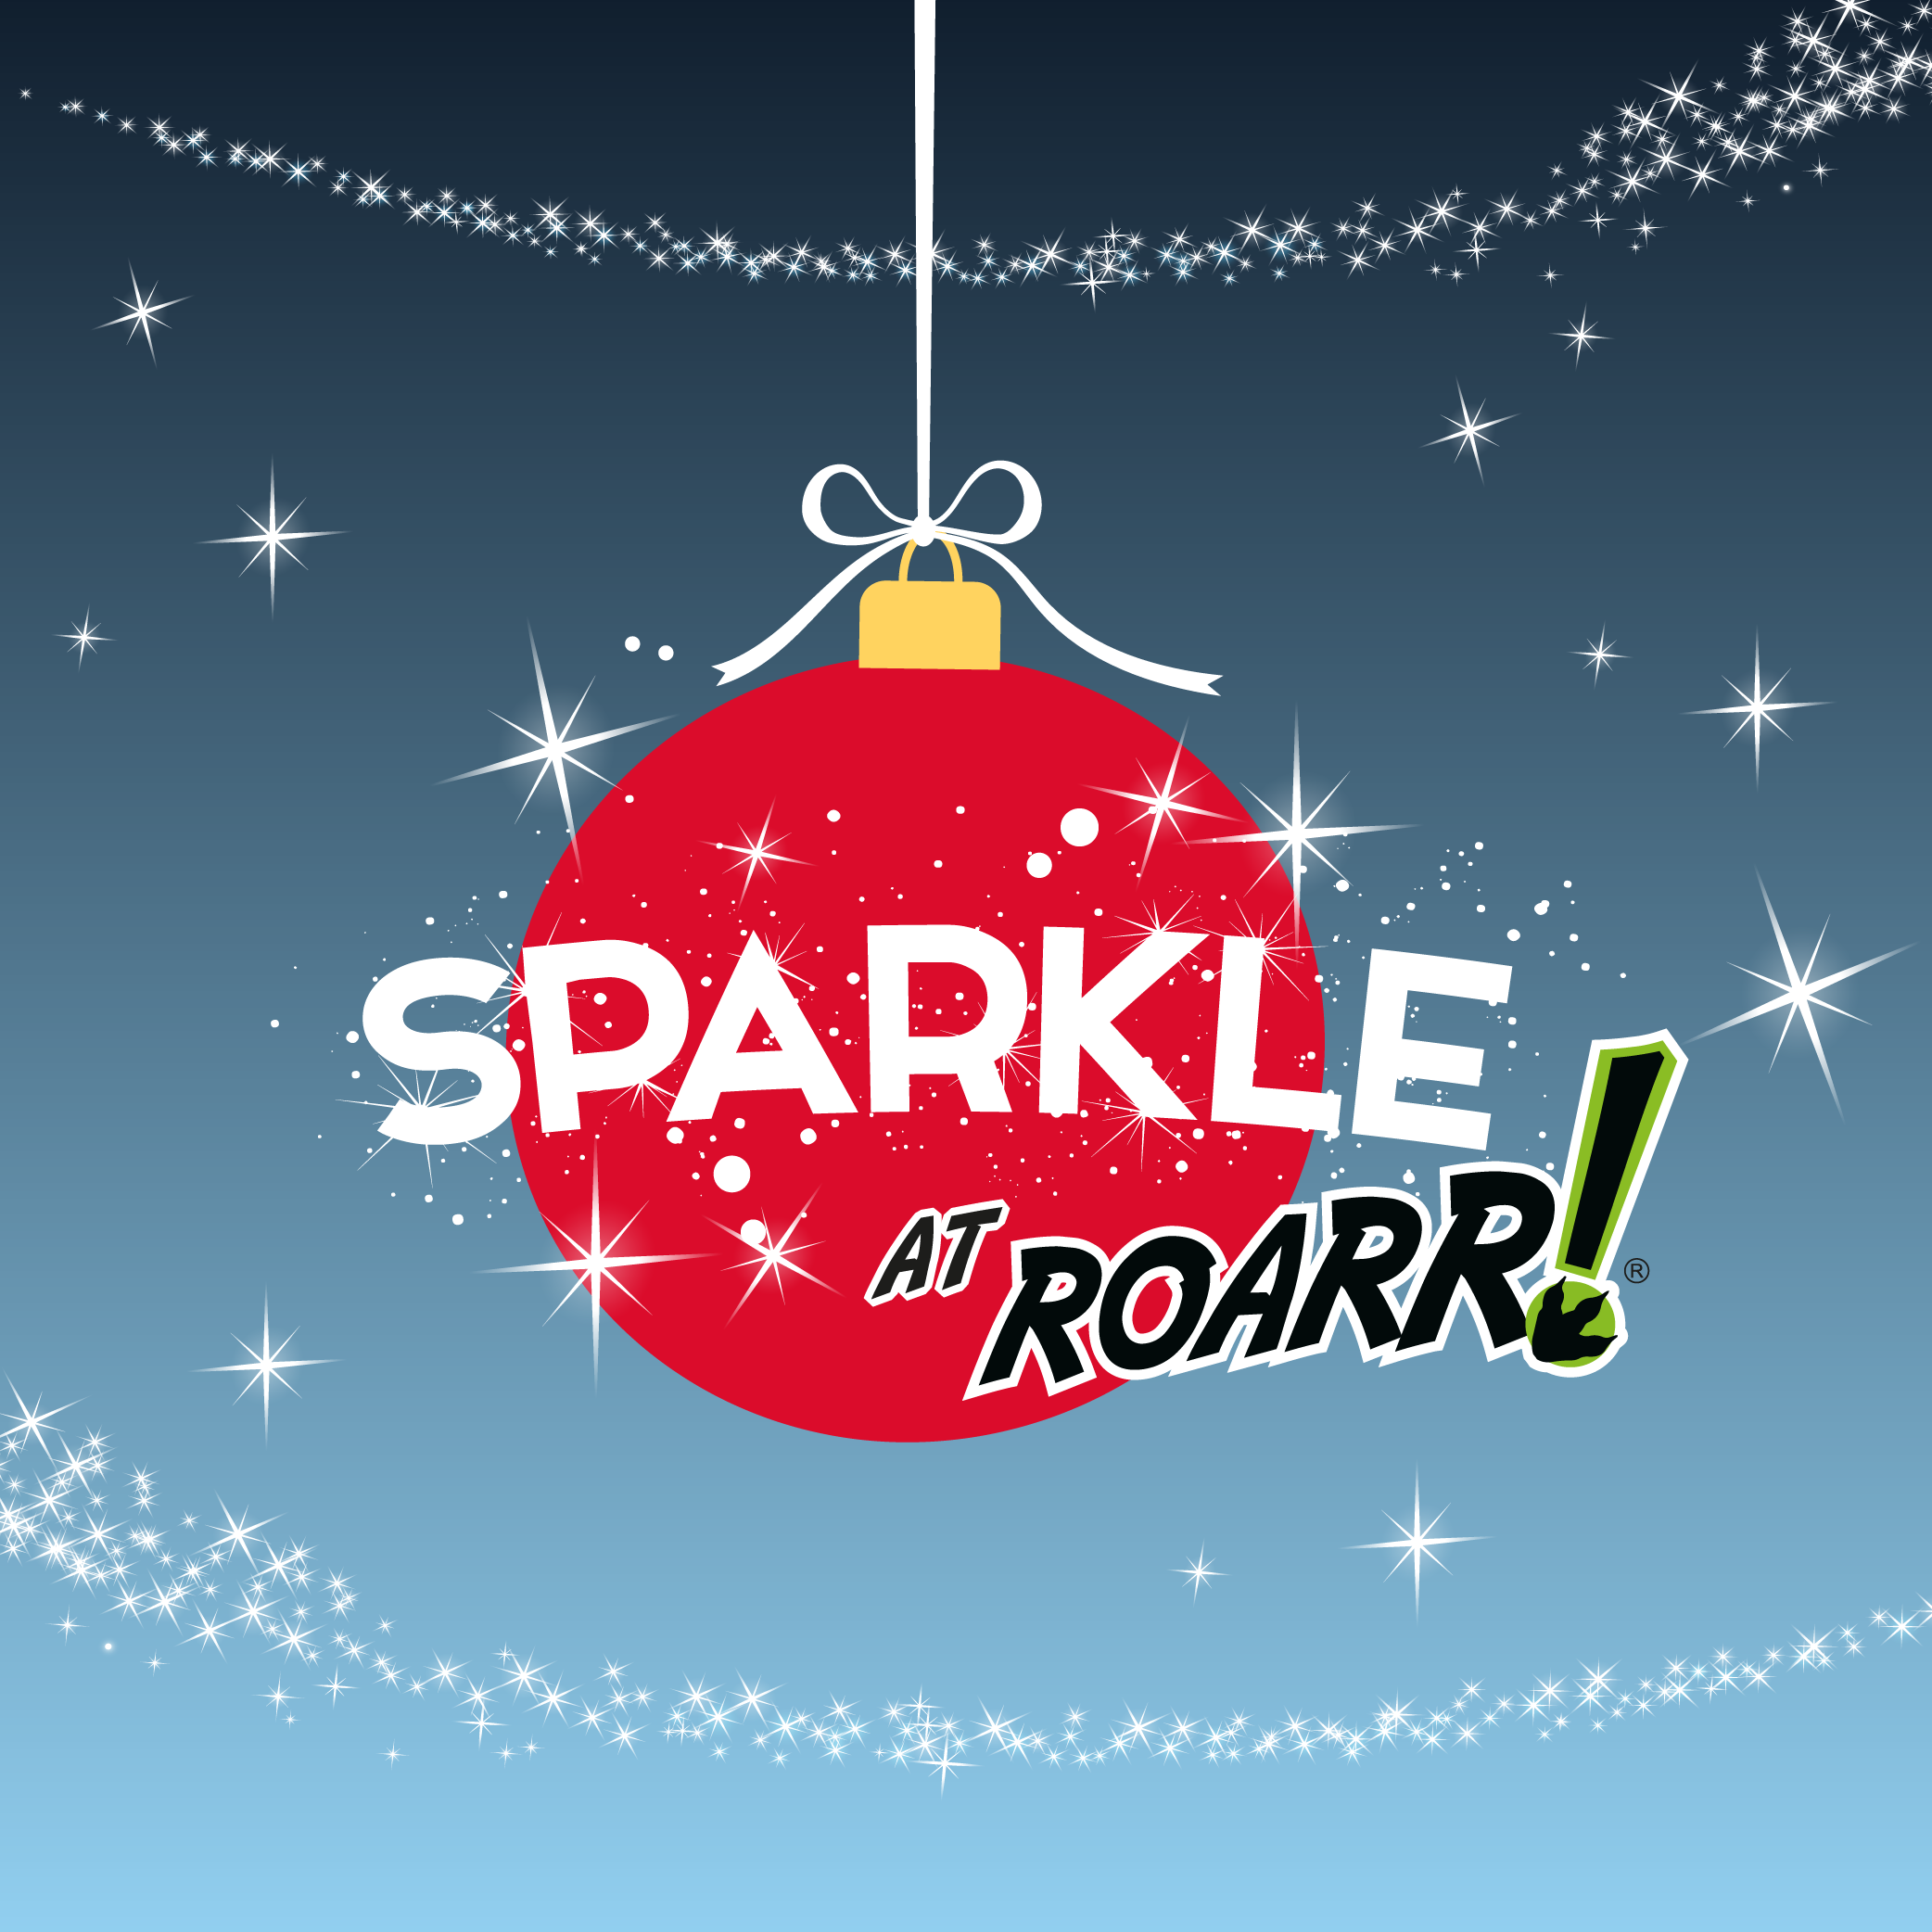 Sparkle at ROARR!